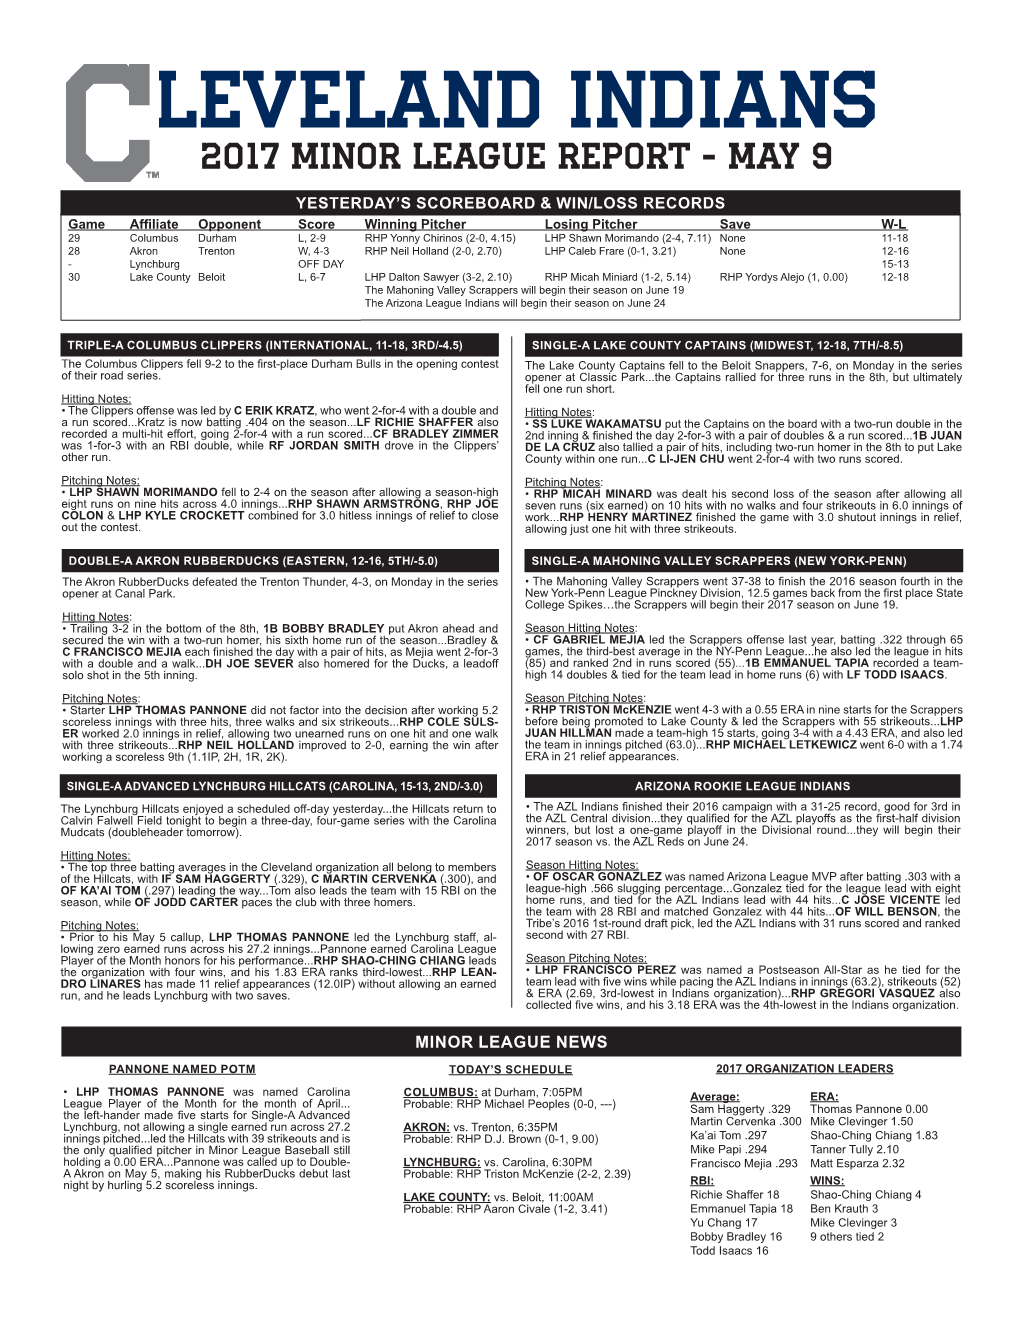 Leveland Indians 2017 Minor League Report - May 9